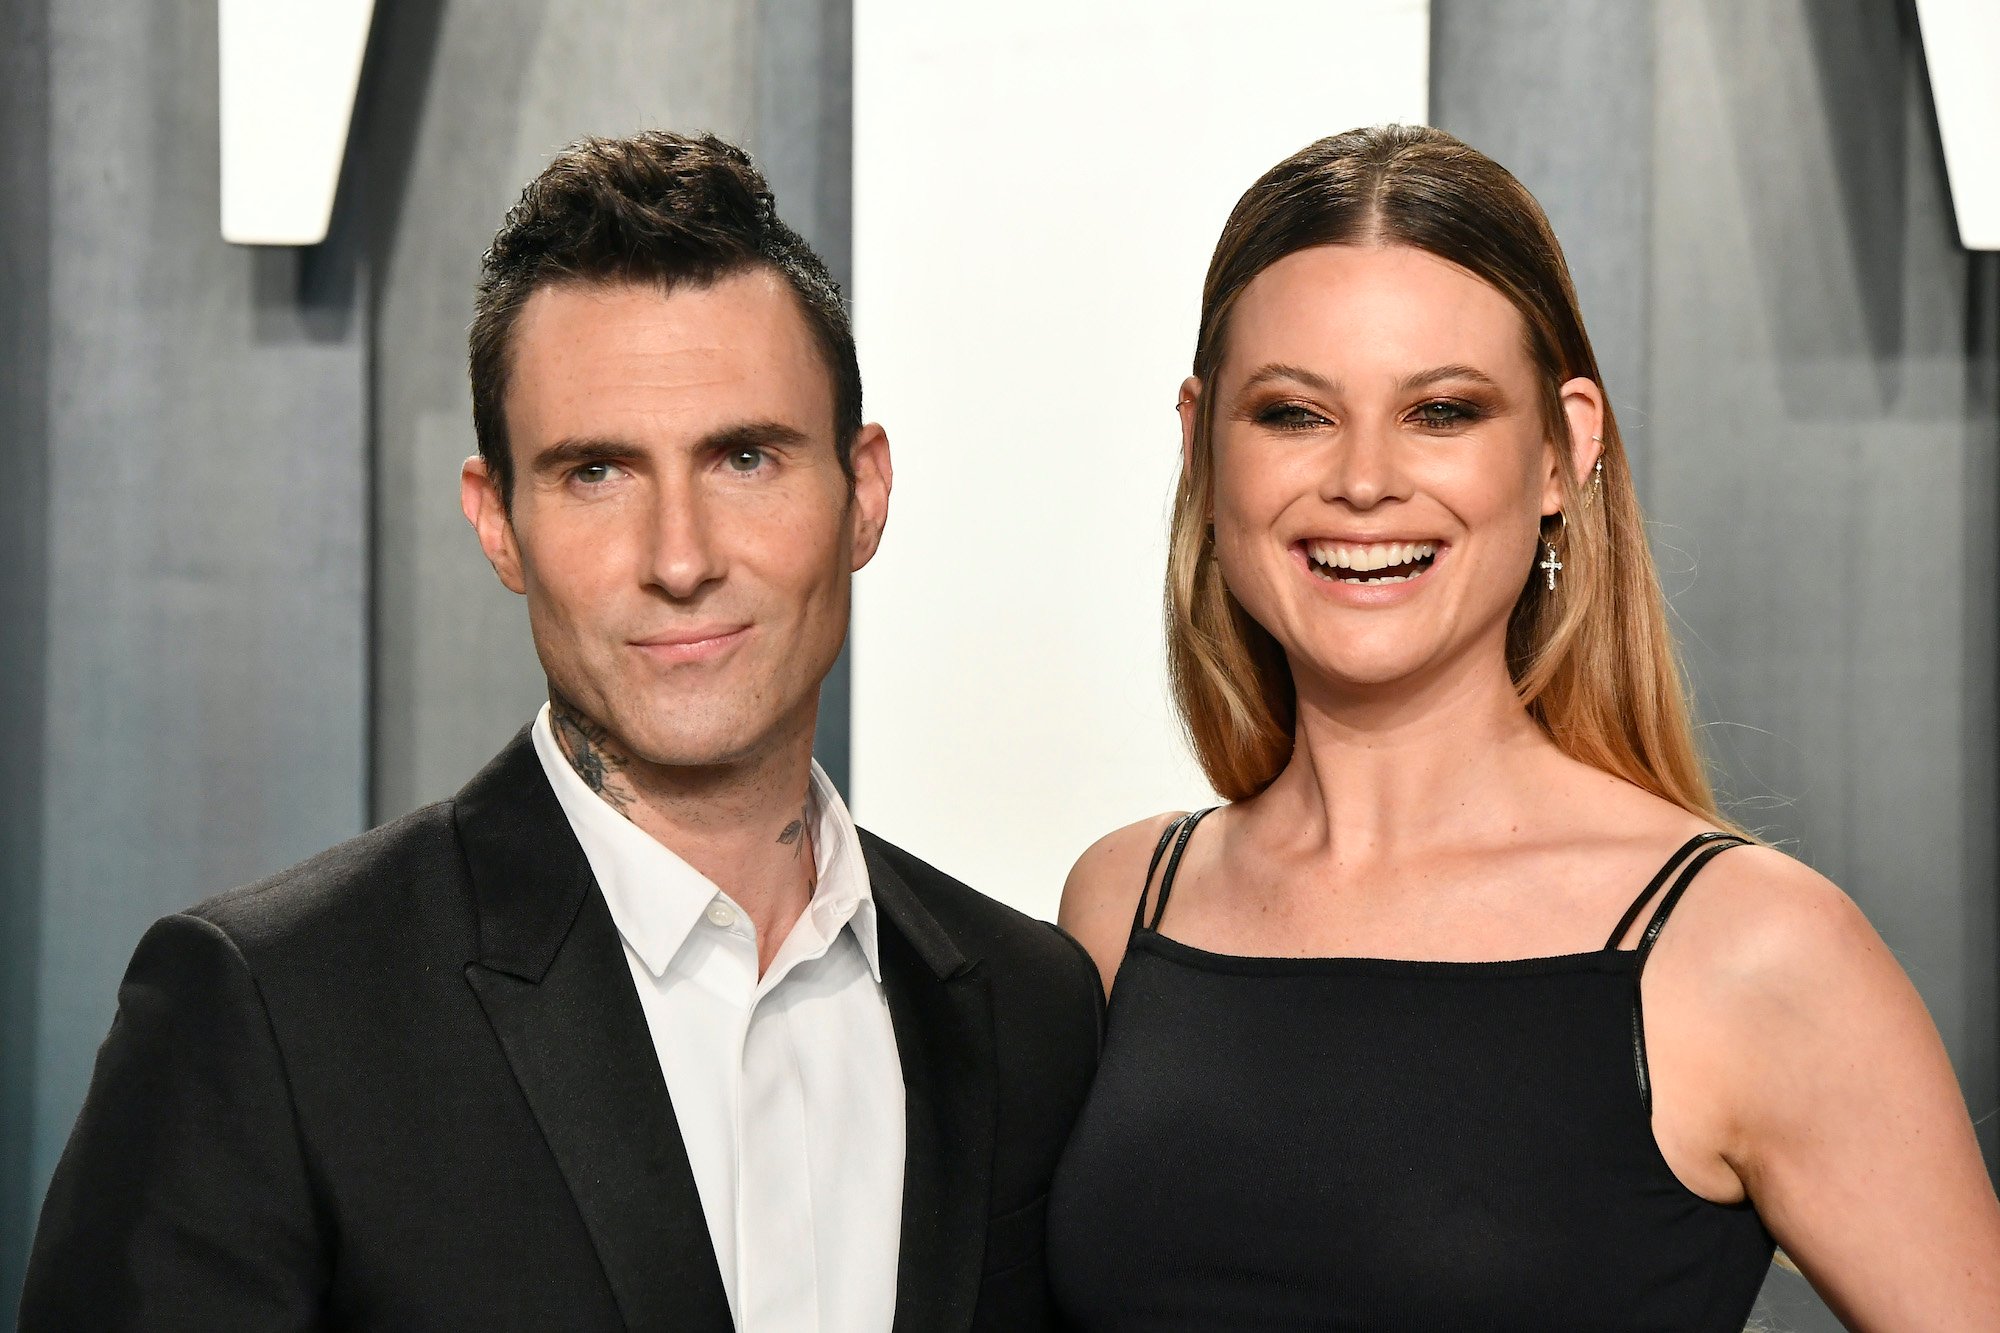 What is Behati Prinsloos Net Worth Separate From Her Husband Adam Levine?